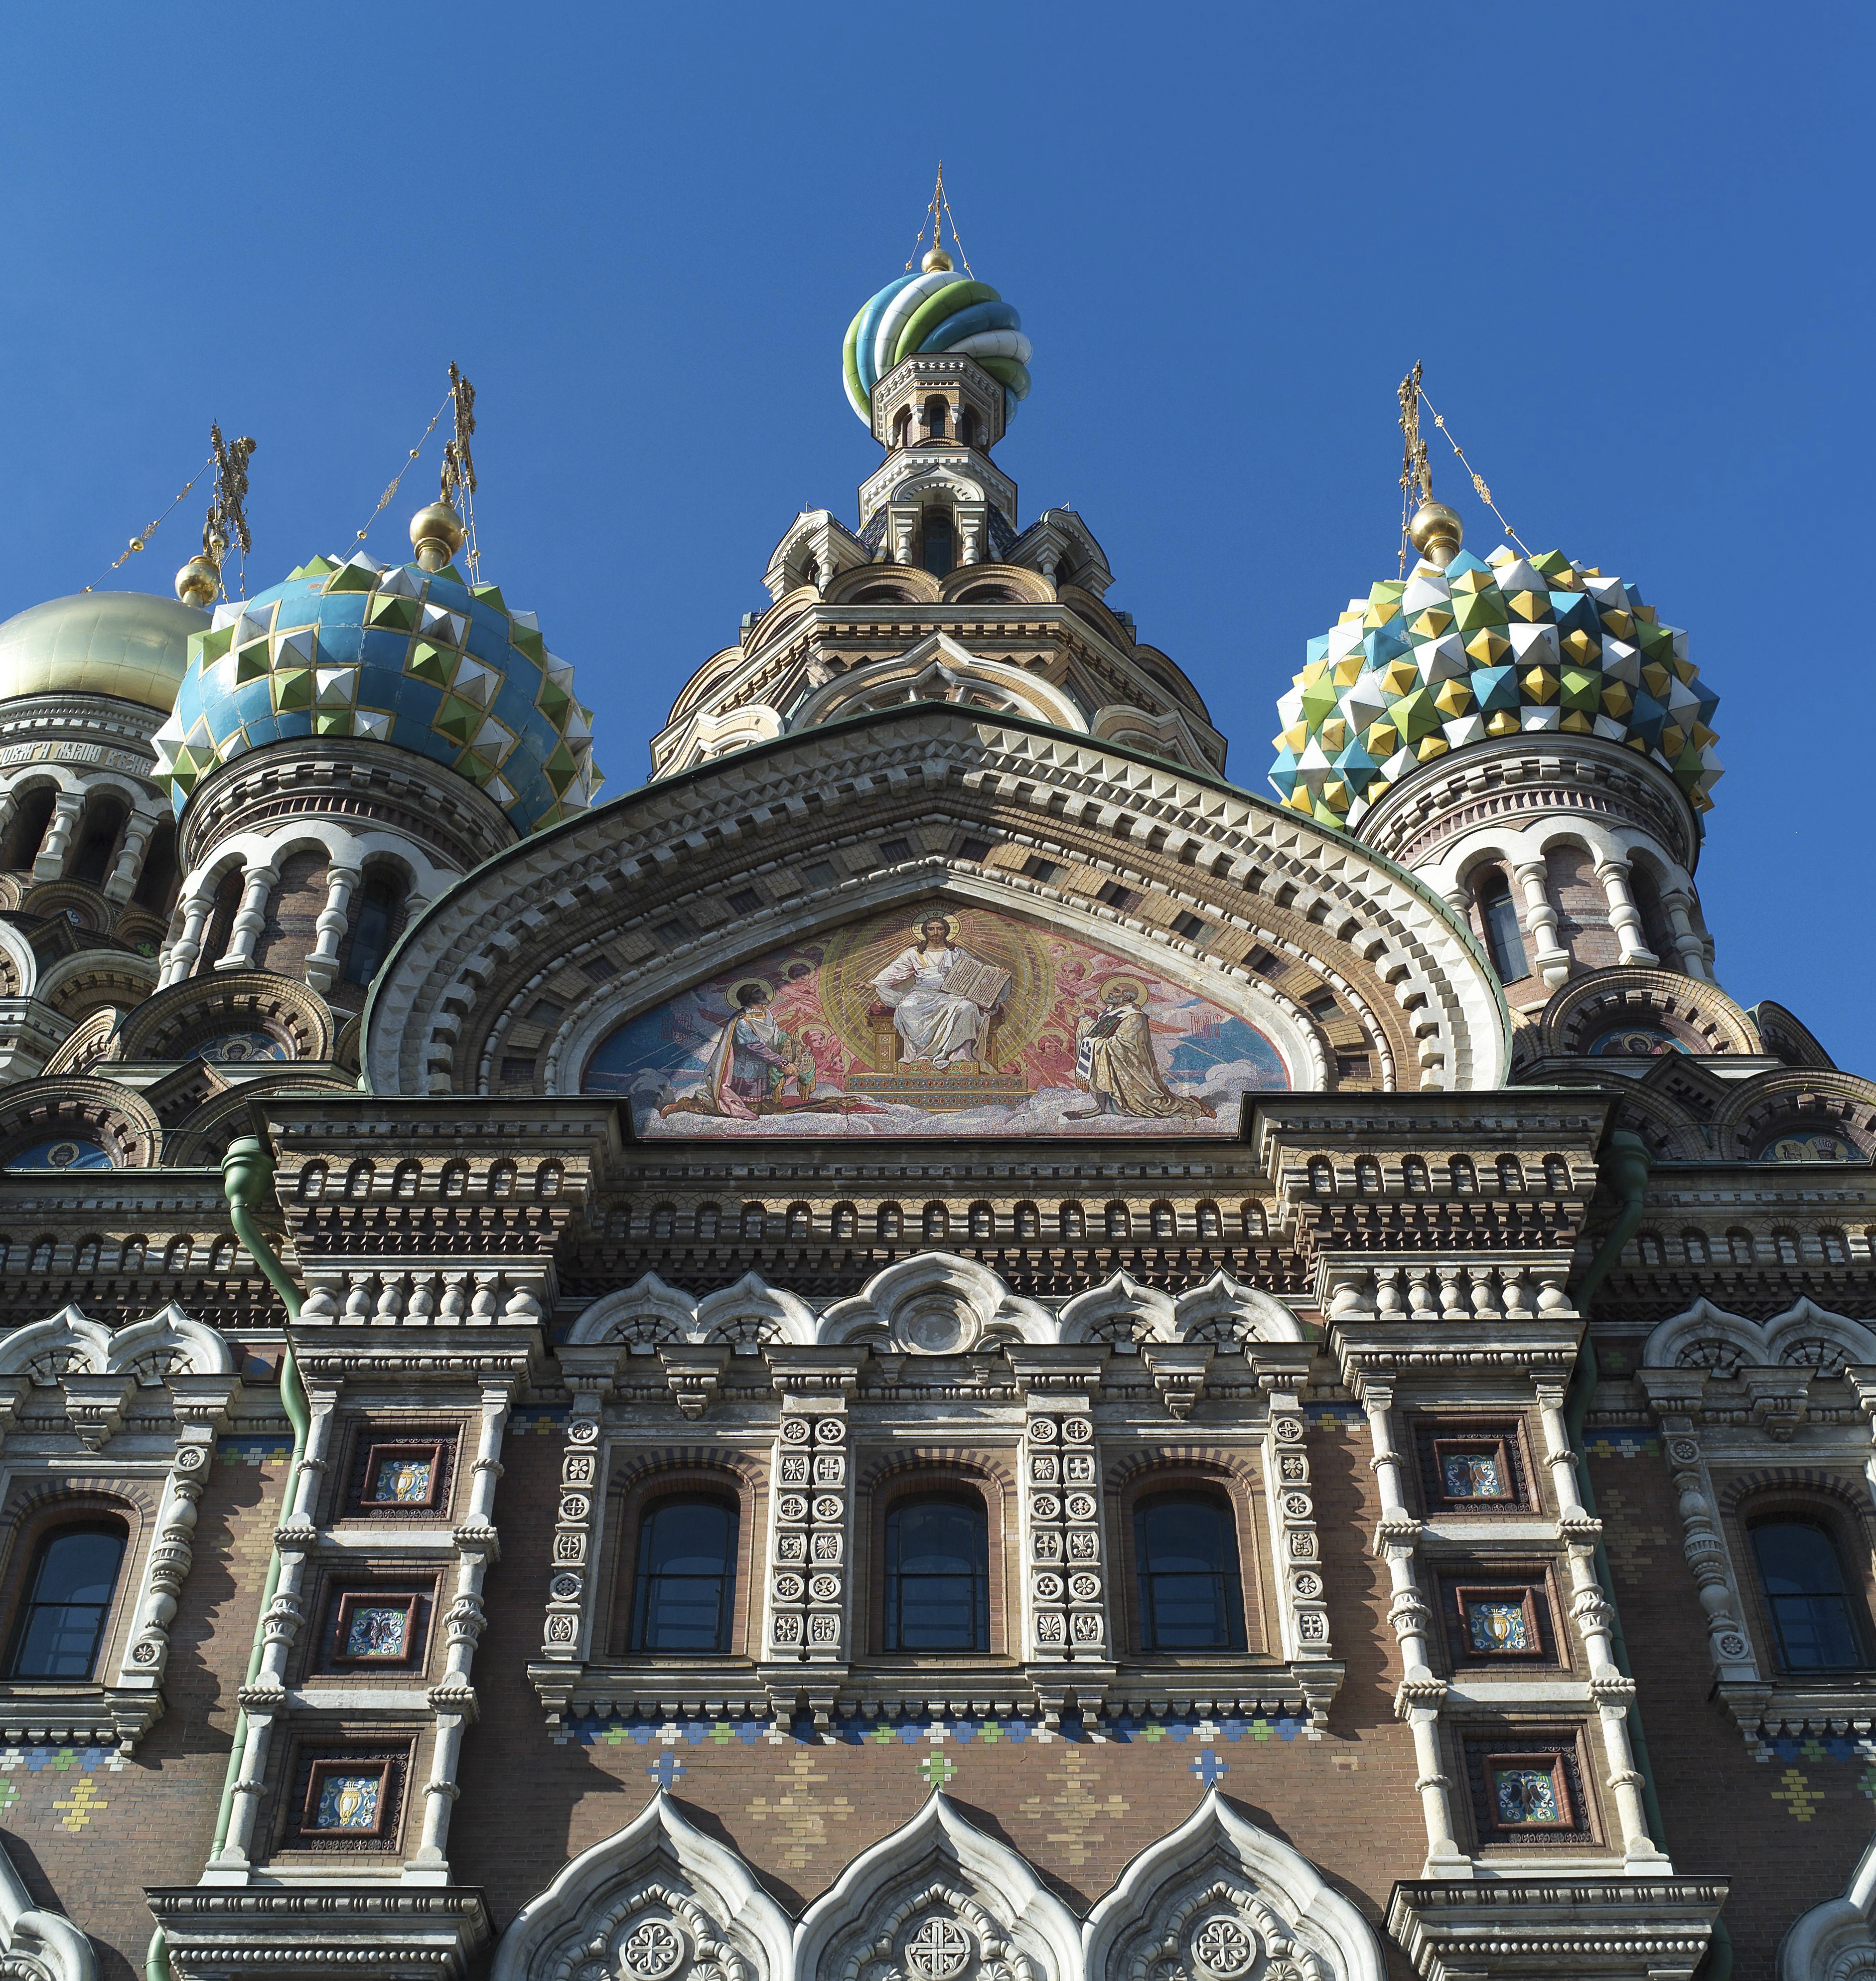 Church of Our Savior on Spilled Blood (St. Petersburg, 2003)